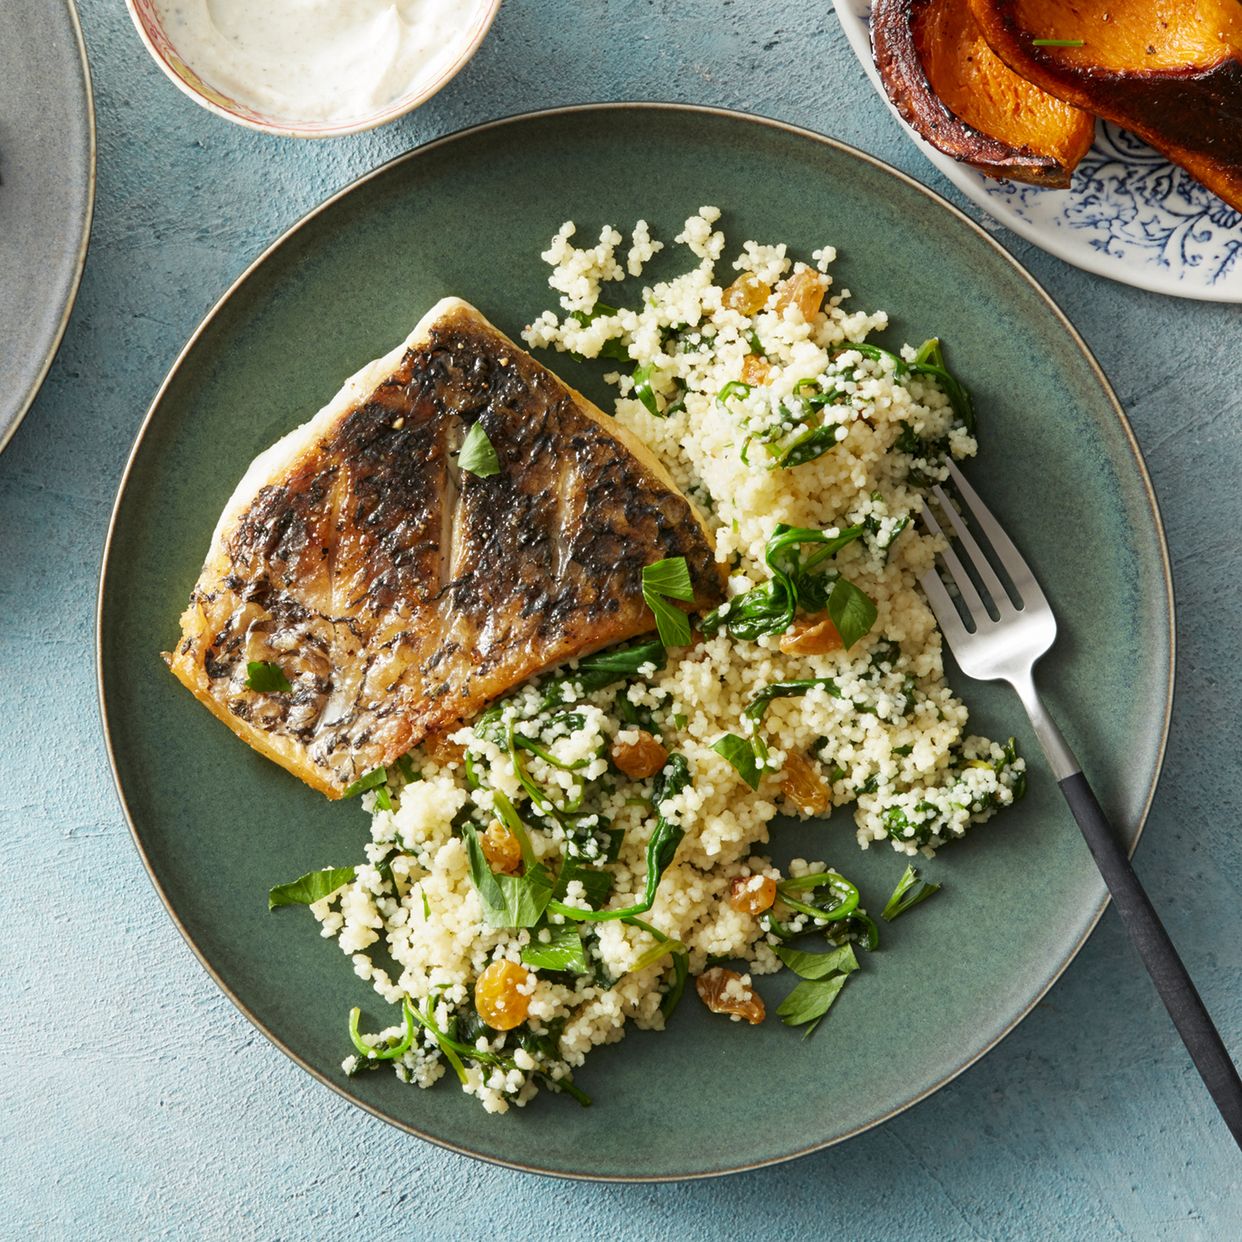 Barramundi & Herbed Couscous with Honeynut Squash & Spiced Labneh